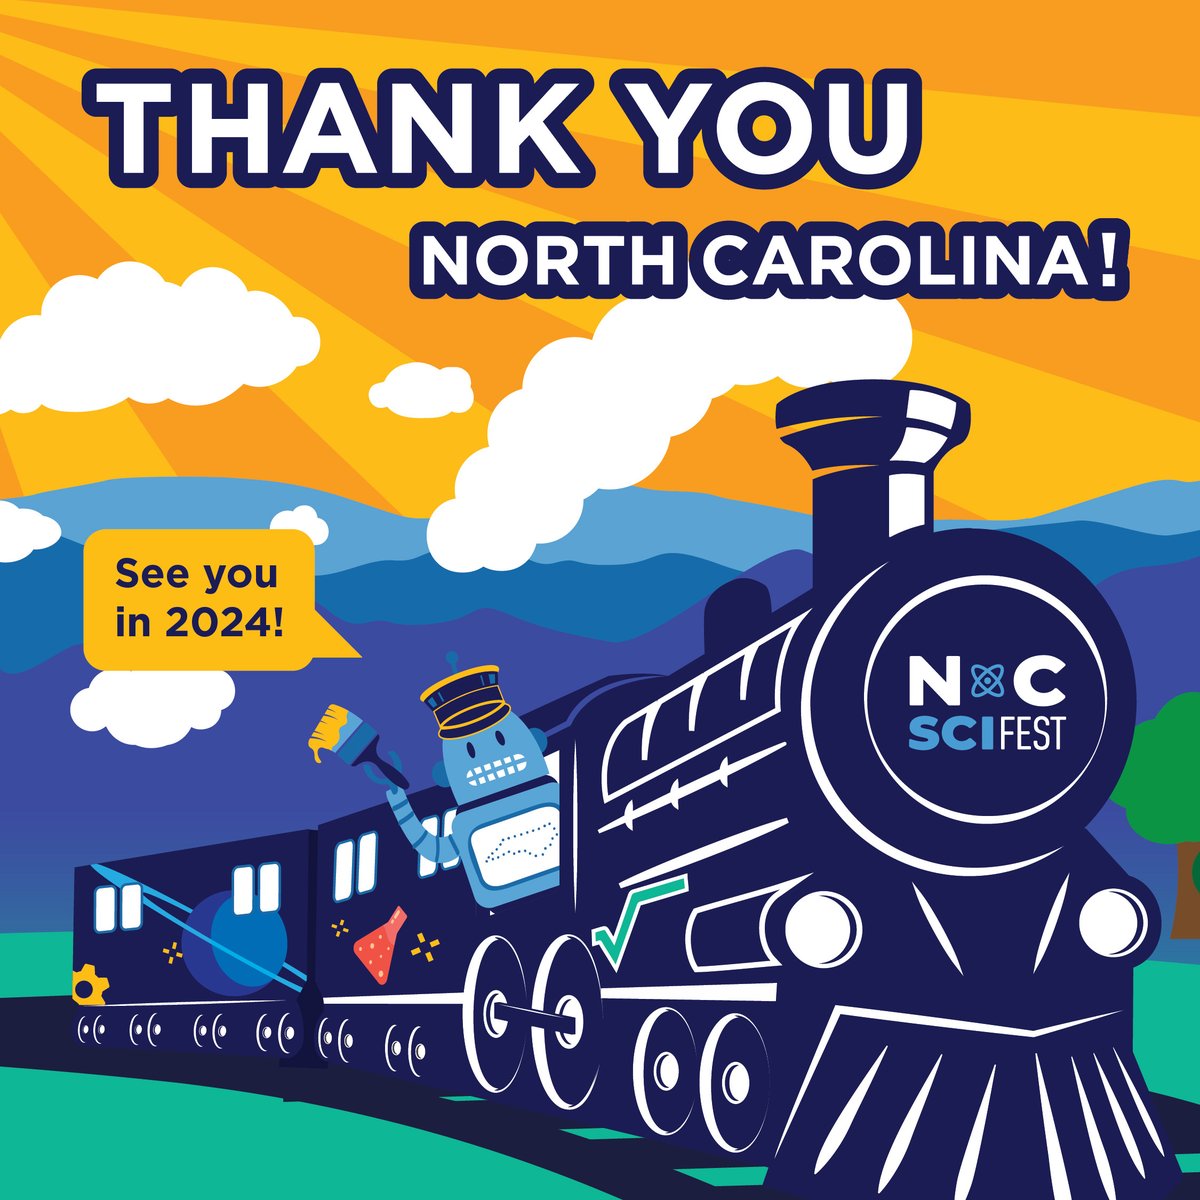 That’s a wrap on #NCSciFest2023 - THANK YOU, NORTH CAROLINA! 

We saw the ♥️ love of science spark curiosity and discovery in all ages. We feel honored to live in a state that believes in the power and impact of #STEM.

#scienceforall #NCSciFest2023 #NCSciFest #FullSTEAMAhead